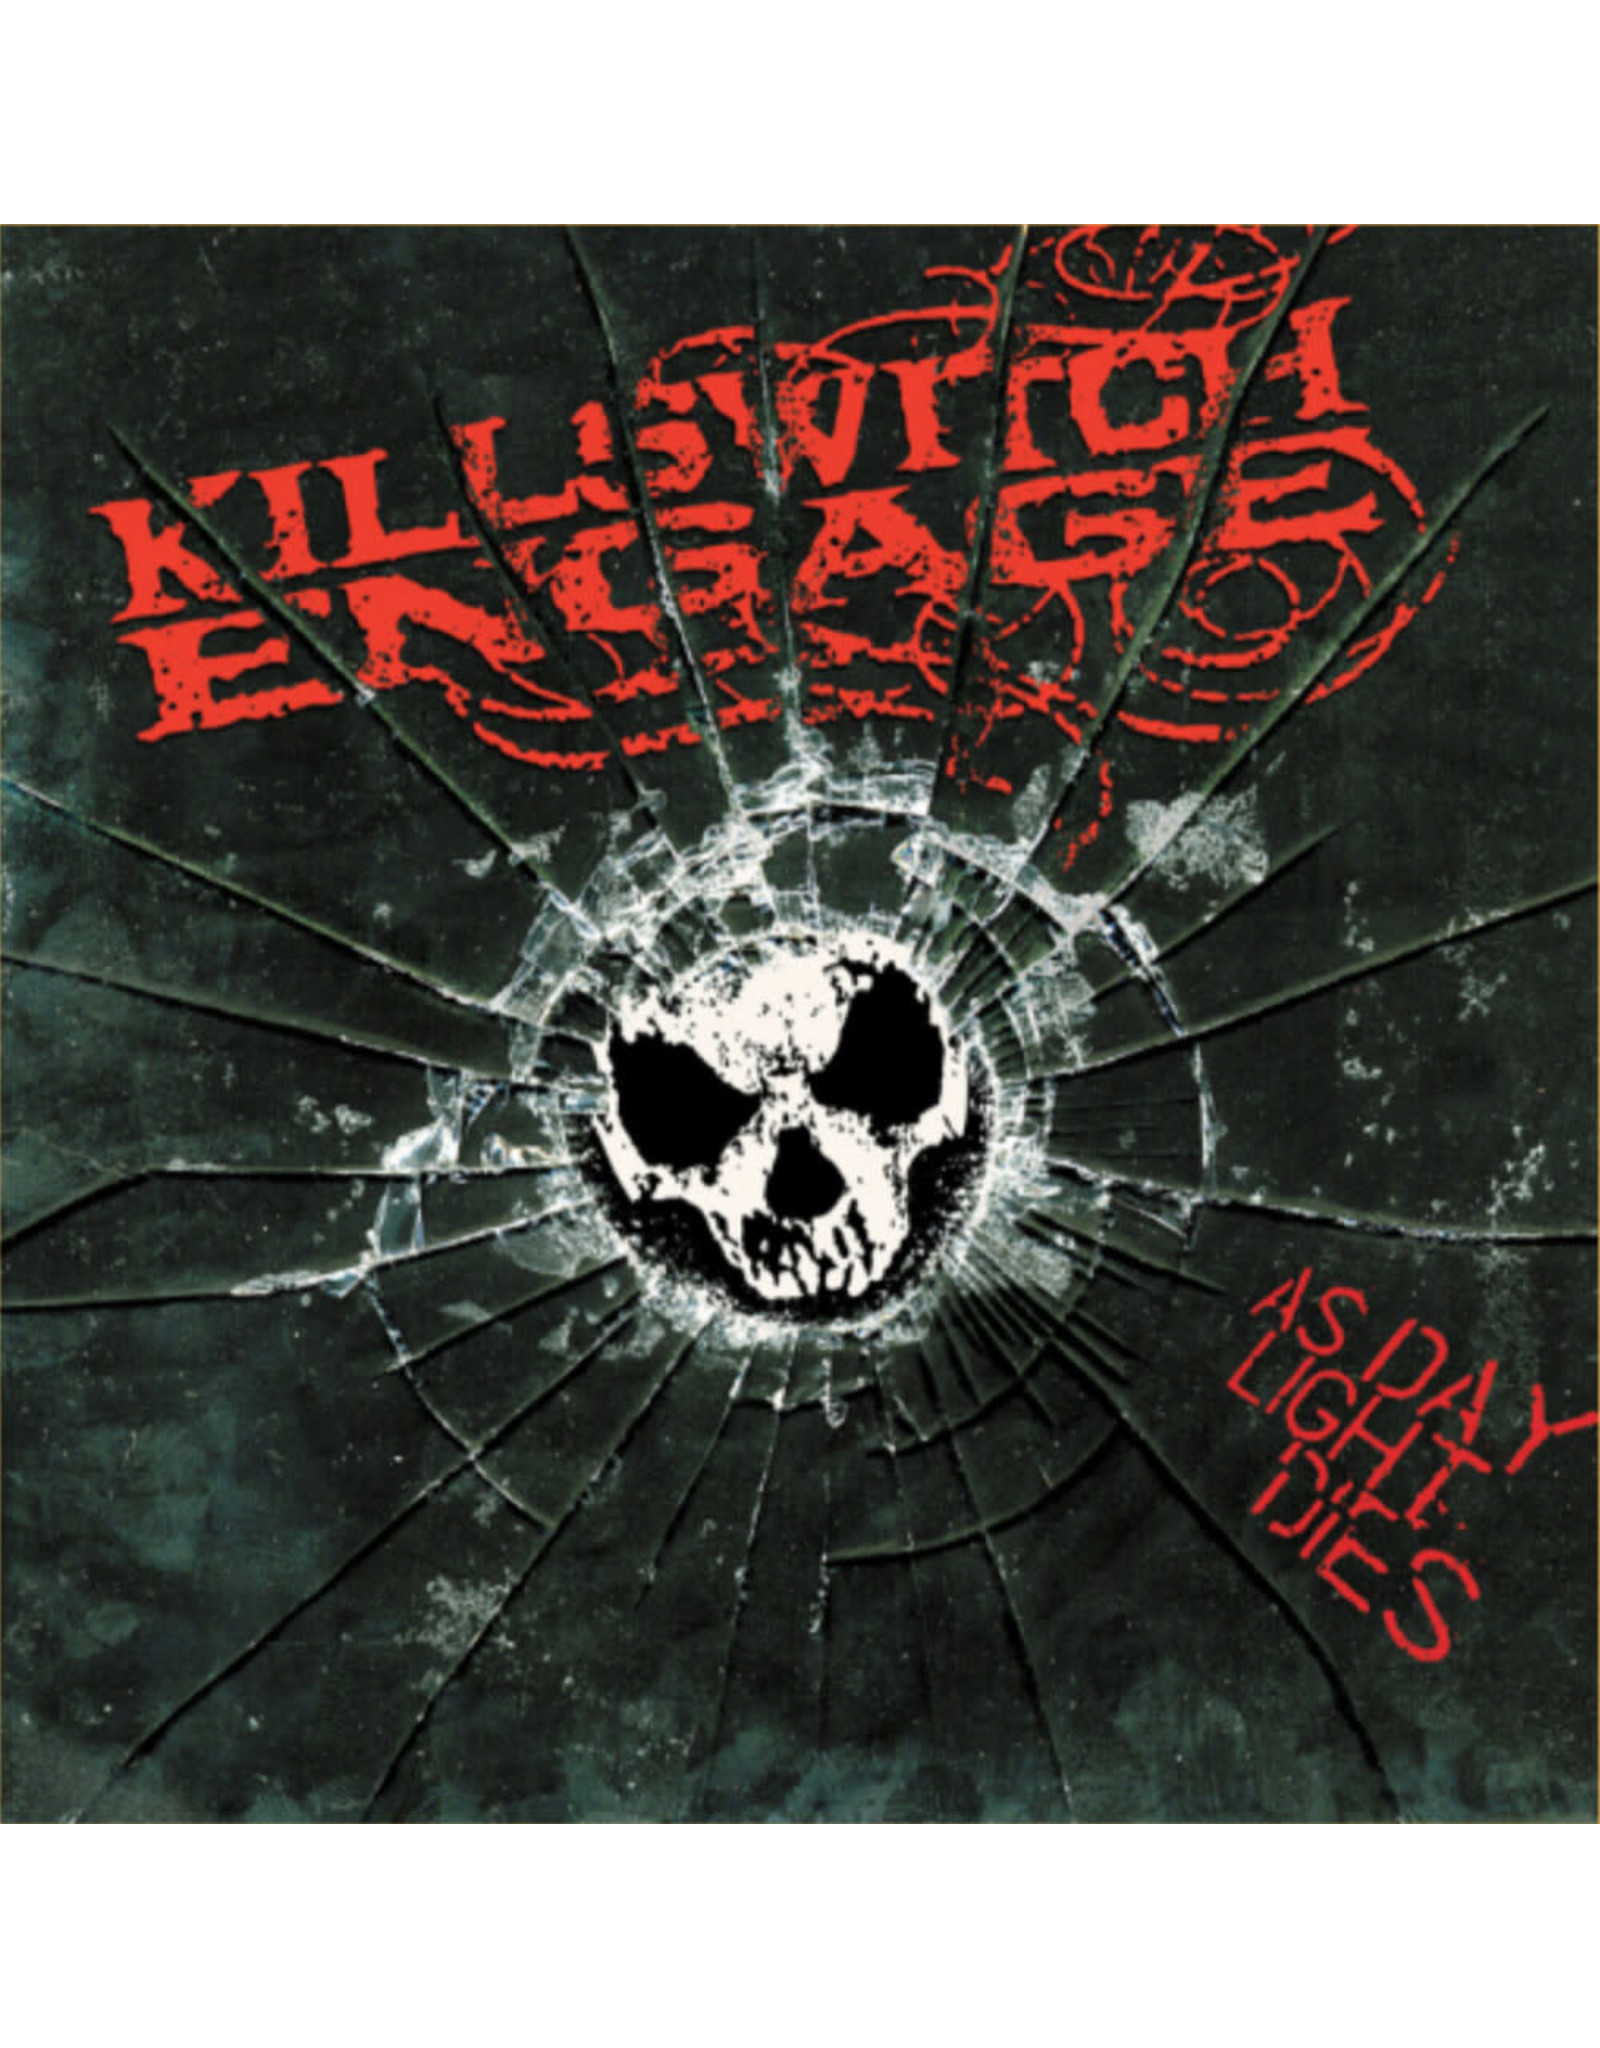 Killswitch Engage - As Daylight Dies (Red & Black Vinyl)